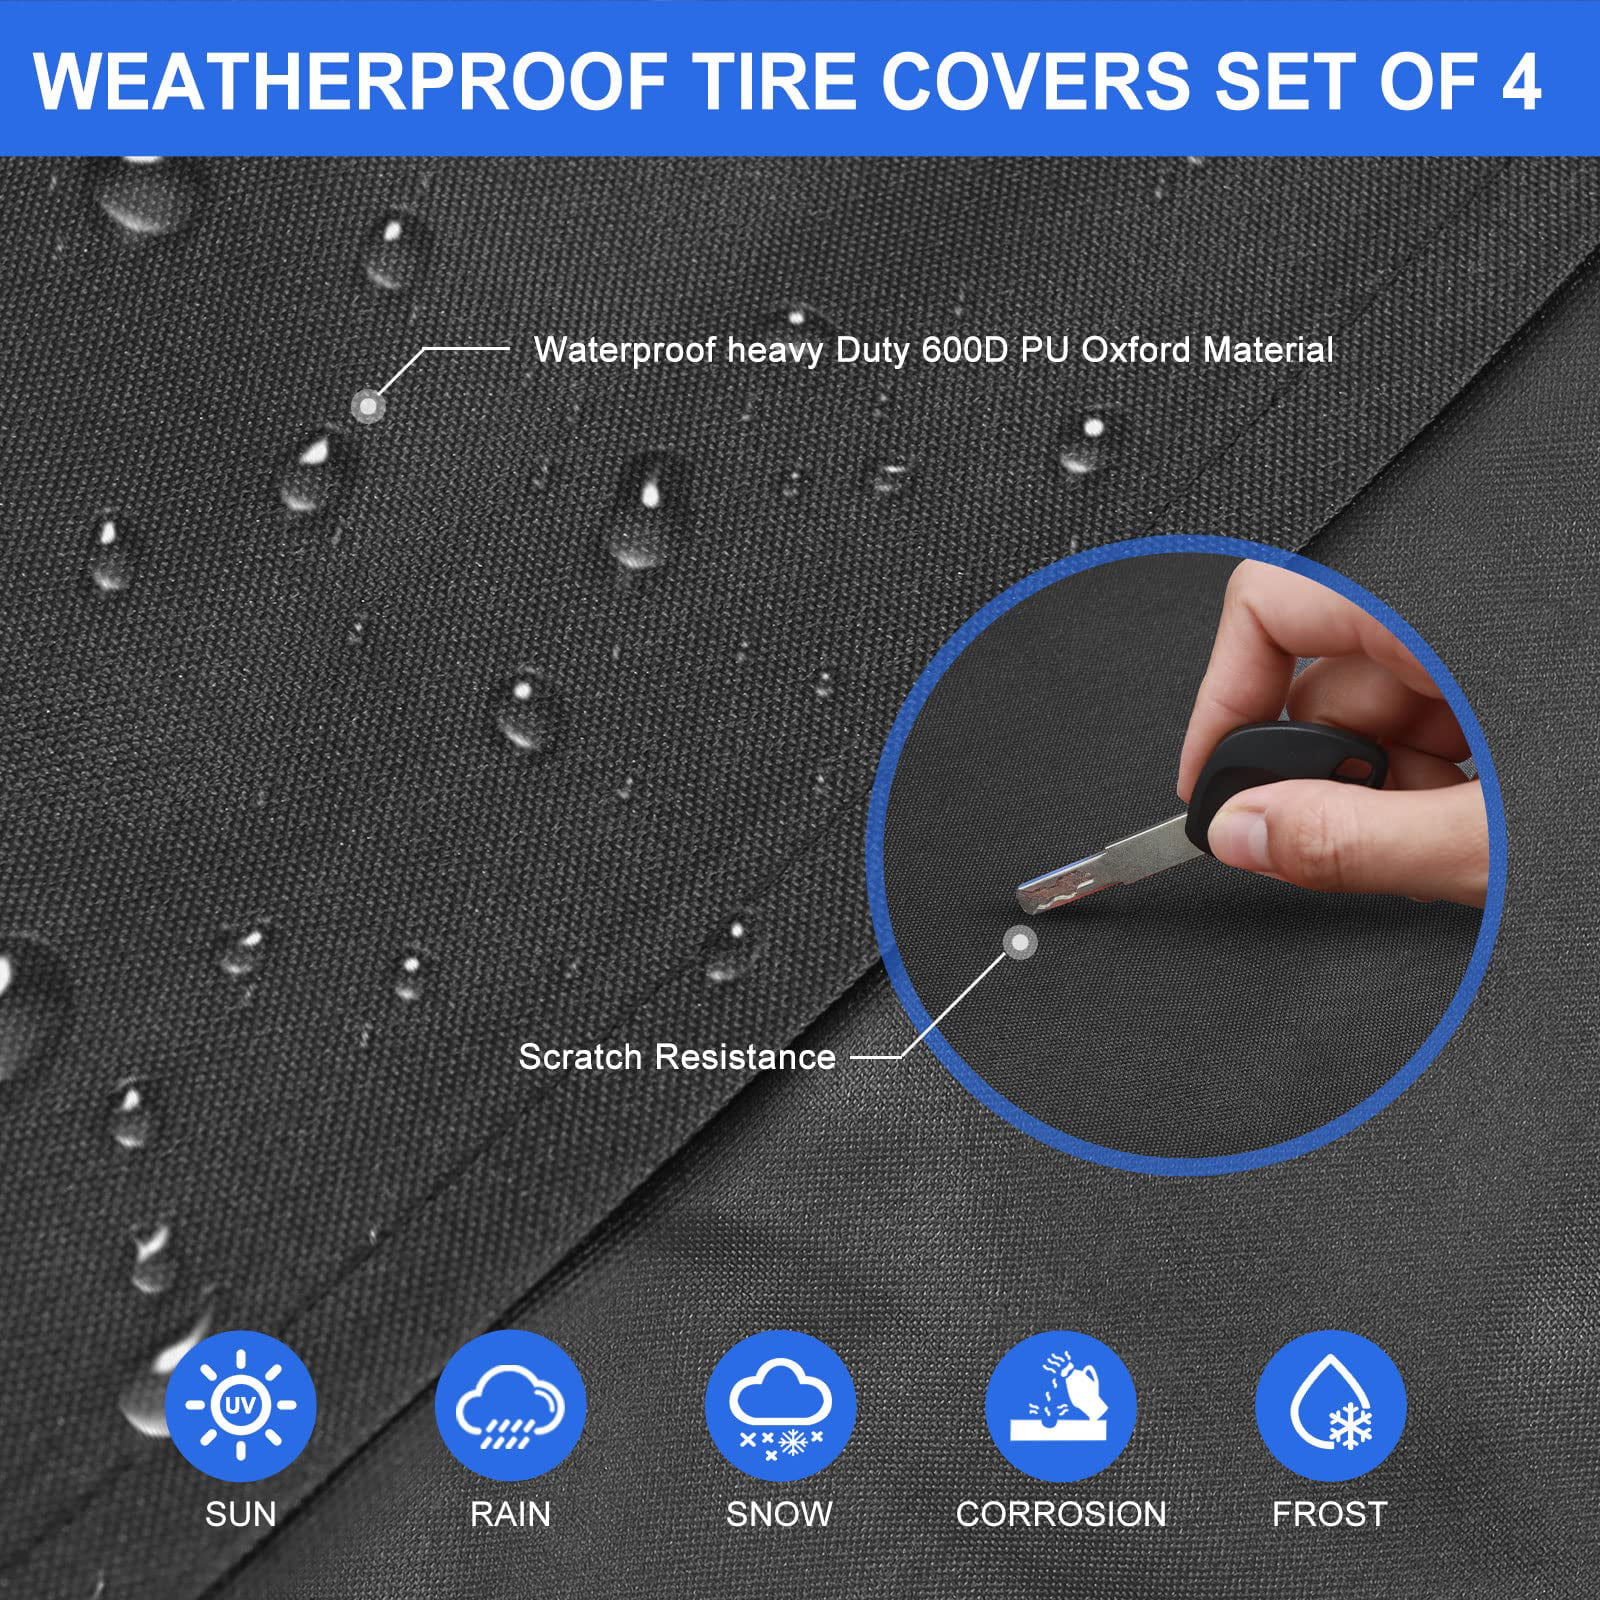 RV Tire Covers Pack, Tough Tire Wheel Protector for Truck, SUV, Travel  Trailer, Camper, Motorhome, Boat, Van, PU Oxford Waterproof Sun Rain Snow  Protector Cover, Fits Tire Diameters 26-29 inch